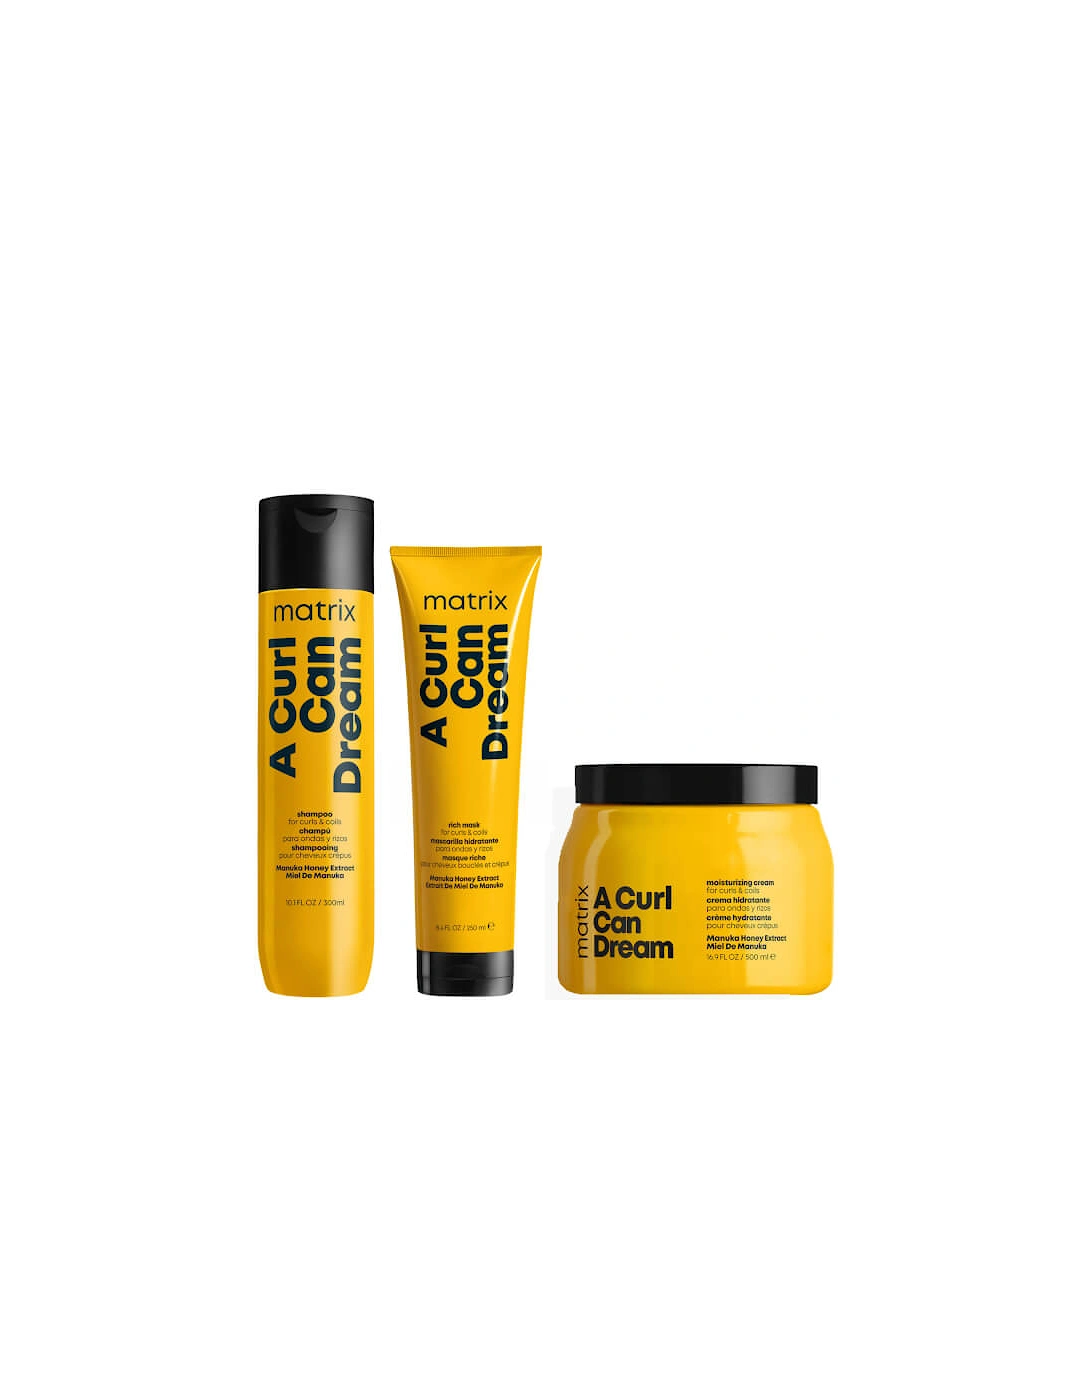 A Curl Can Dream Manuka Honey Infused Shampoo, Mask and Leave-in Cream Routine for Curls and Coils, 2 of 1